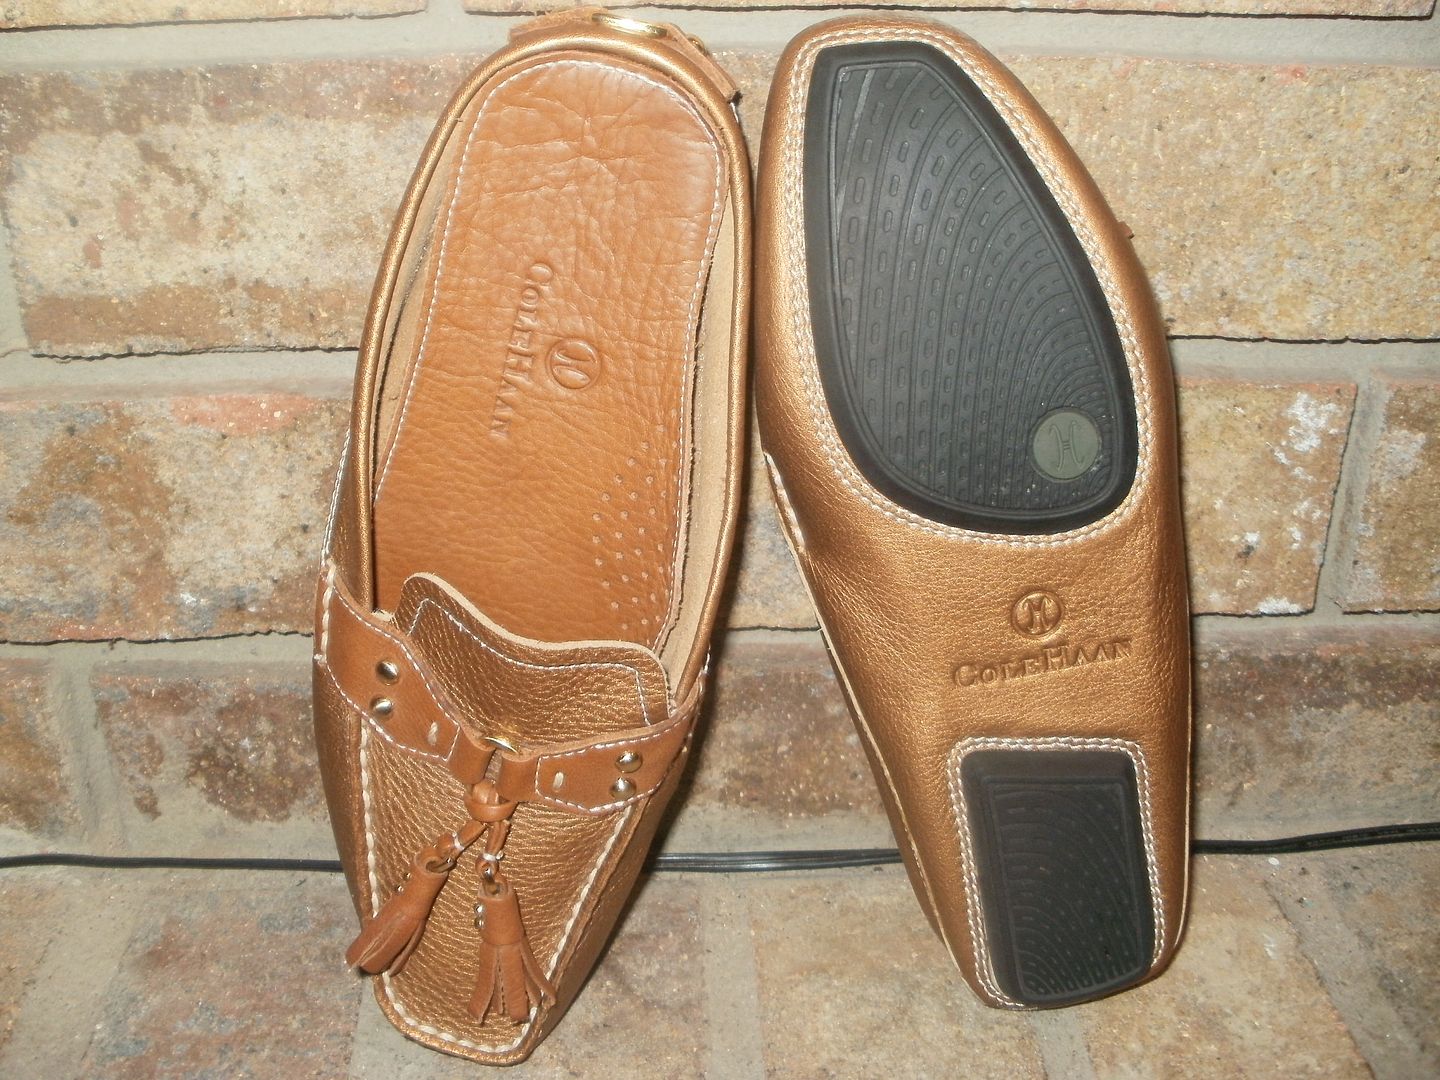 COLE HAAN LEATHER SLIDES SIZE 5.5 M/ CHOOSE GOLD OR SILVER STYLE | eBay